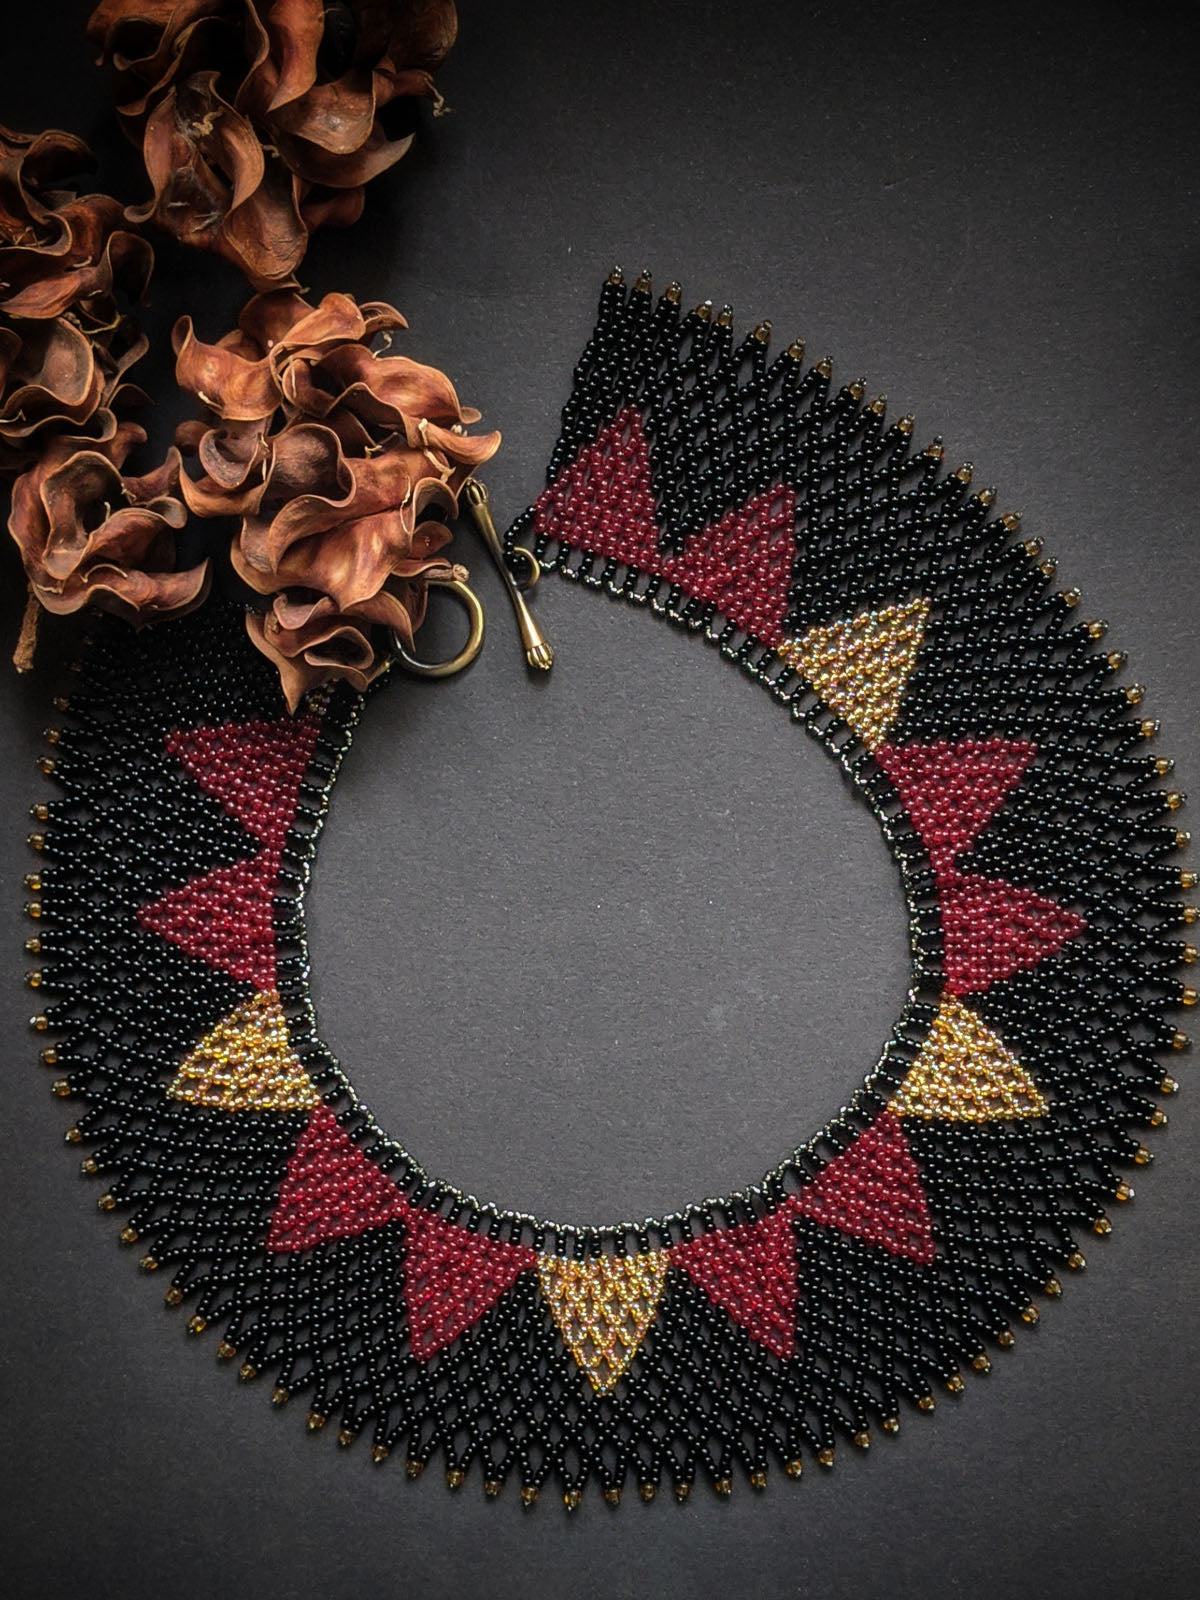 Handmade Beaded Necklace in Black & Red - Collar Necklace